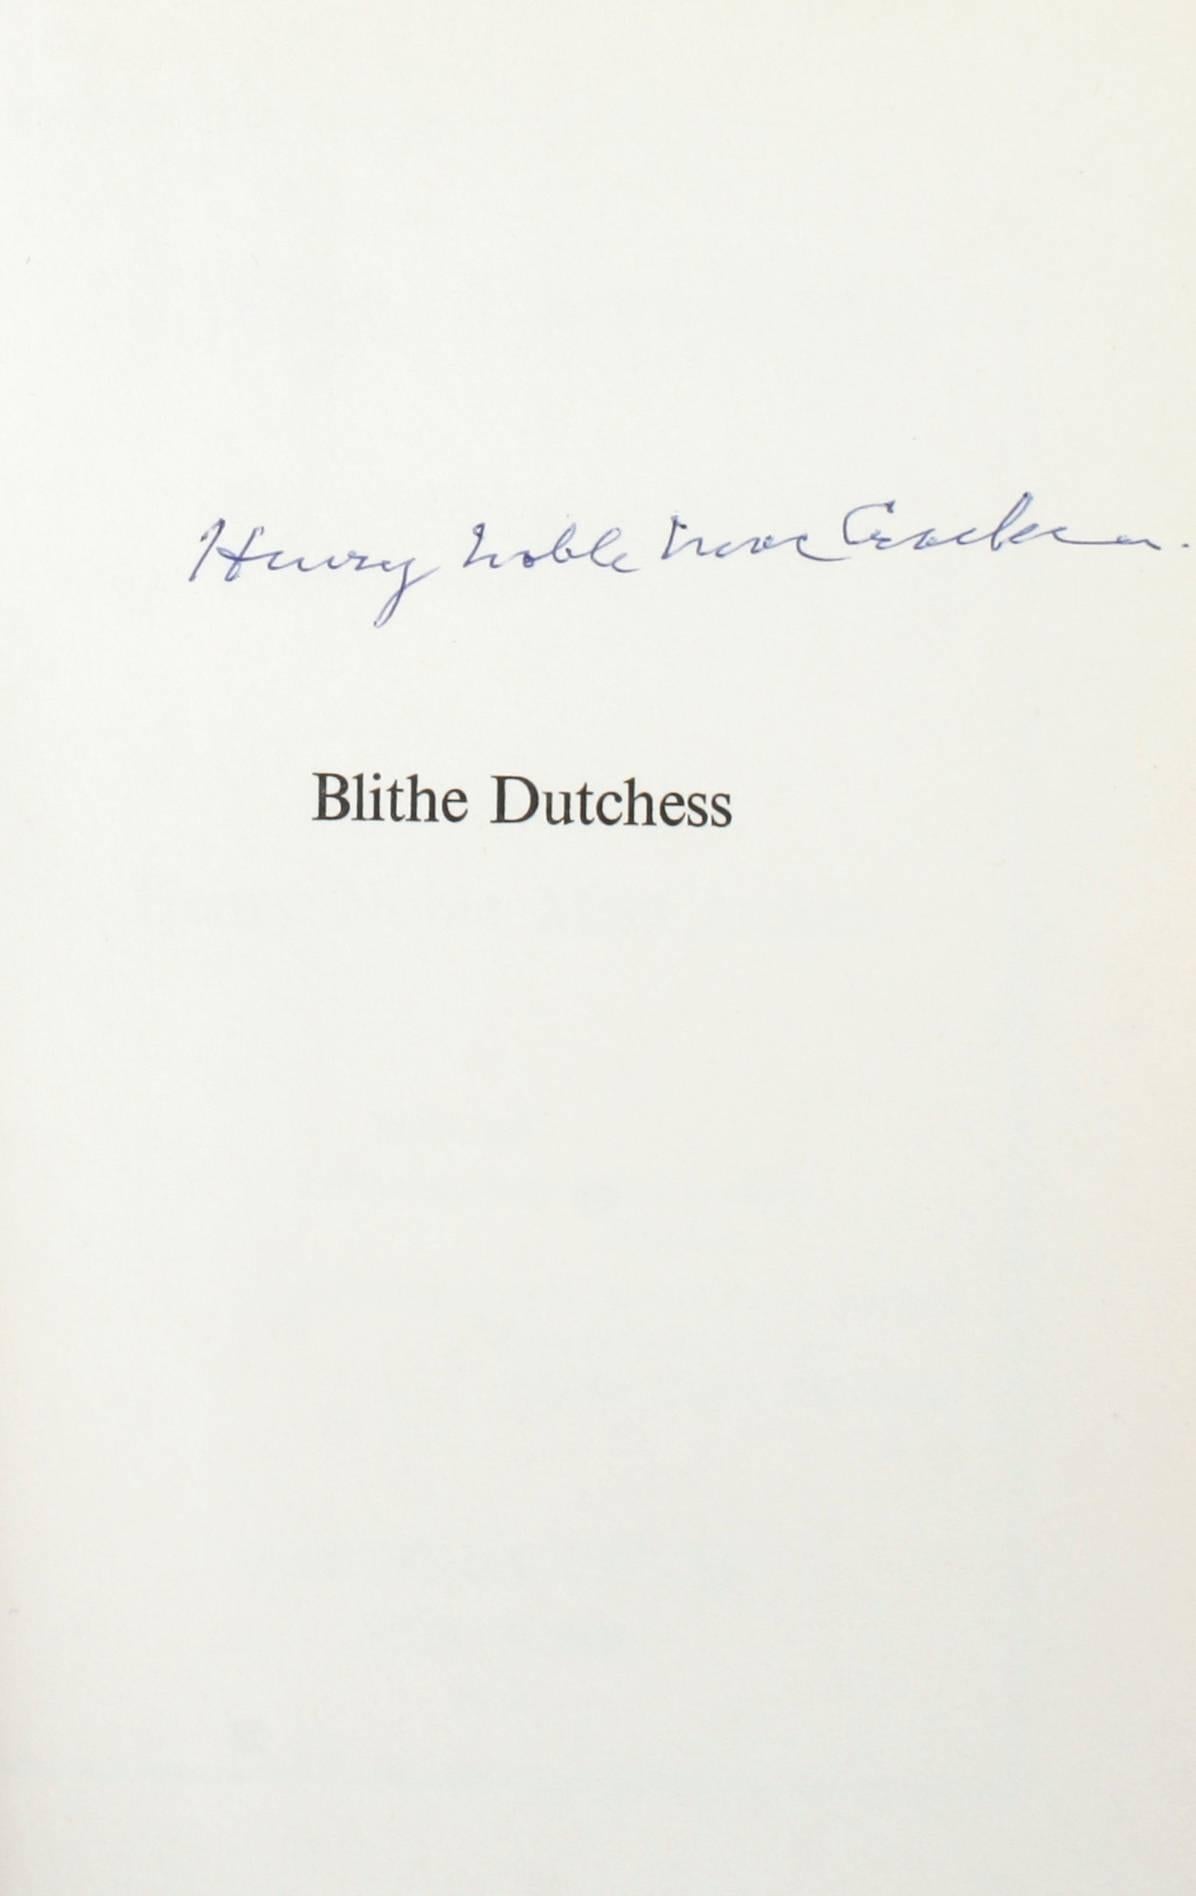 Blithe Dutchess by Henry Noble MacCracken. New York: Hastings House, 1958. Signed first edition hardcover with dust jacket. 500 pp. A historical account of Duchess County New York from 1812. It is an continuation of a book called ''Old Dutchess